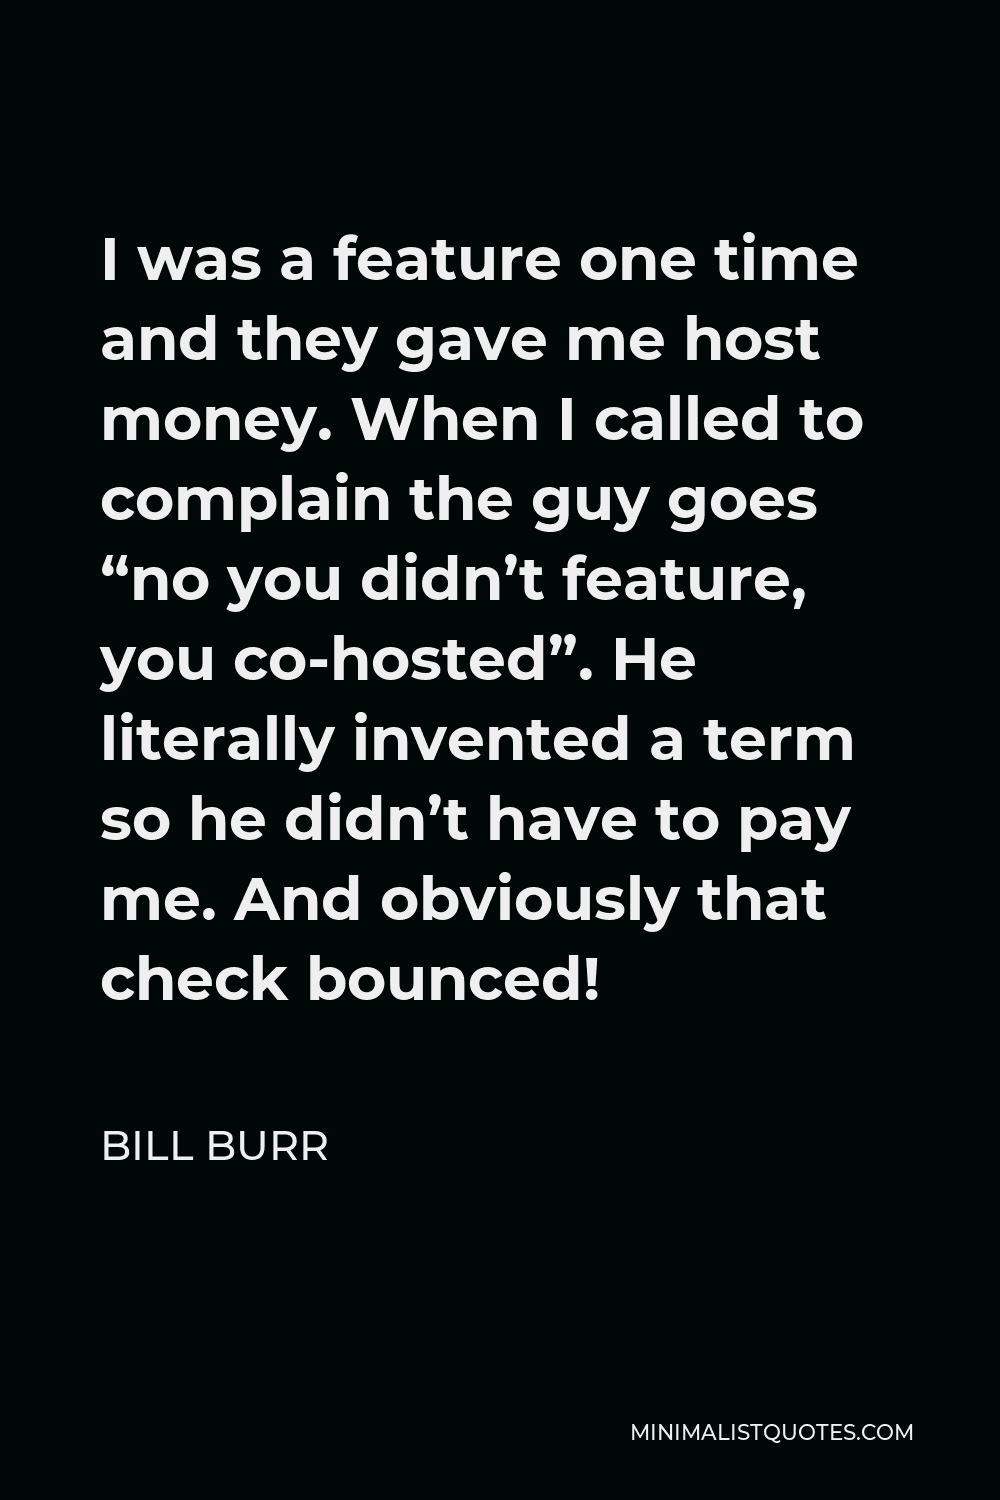 Bill Burr Quote - I was a feature one time and they gave me host money. When I called to complain the guy goes “no you didn’t feature, you co-hosted”. He literally invented a term so he didn’t have to pay me. And obviously that check bounced!